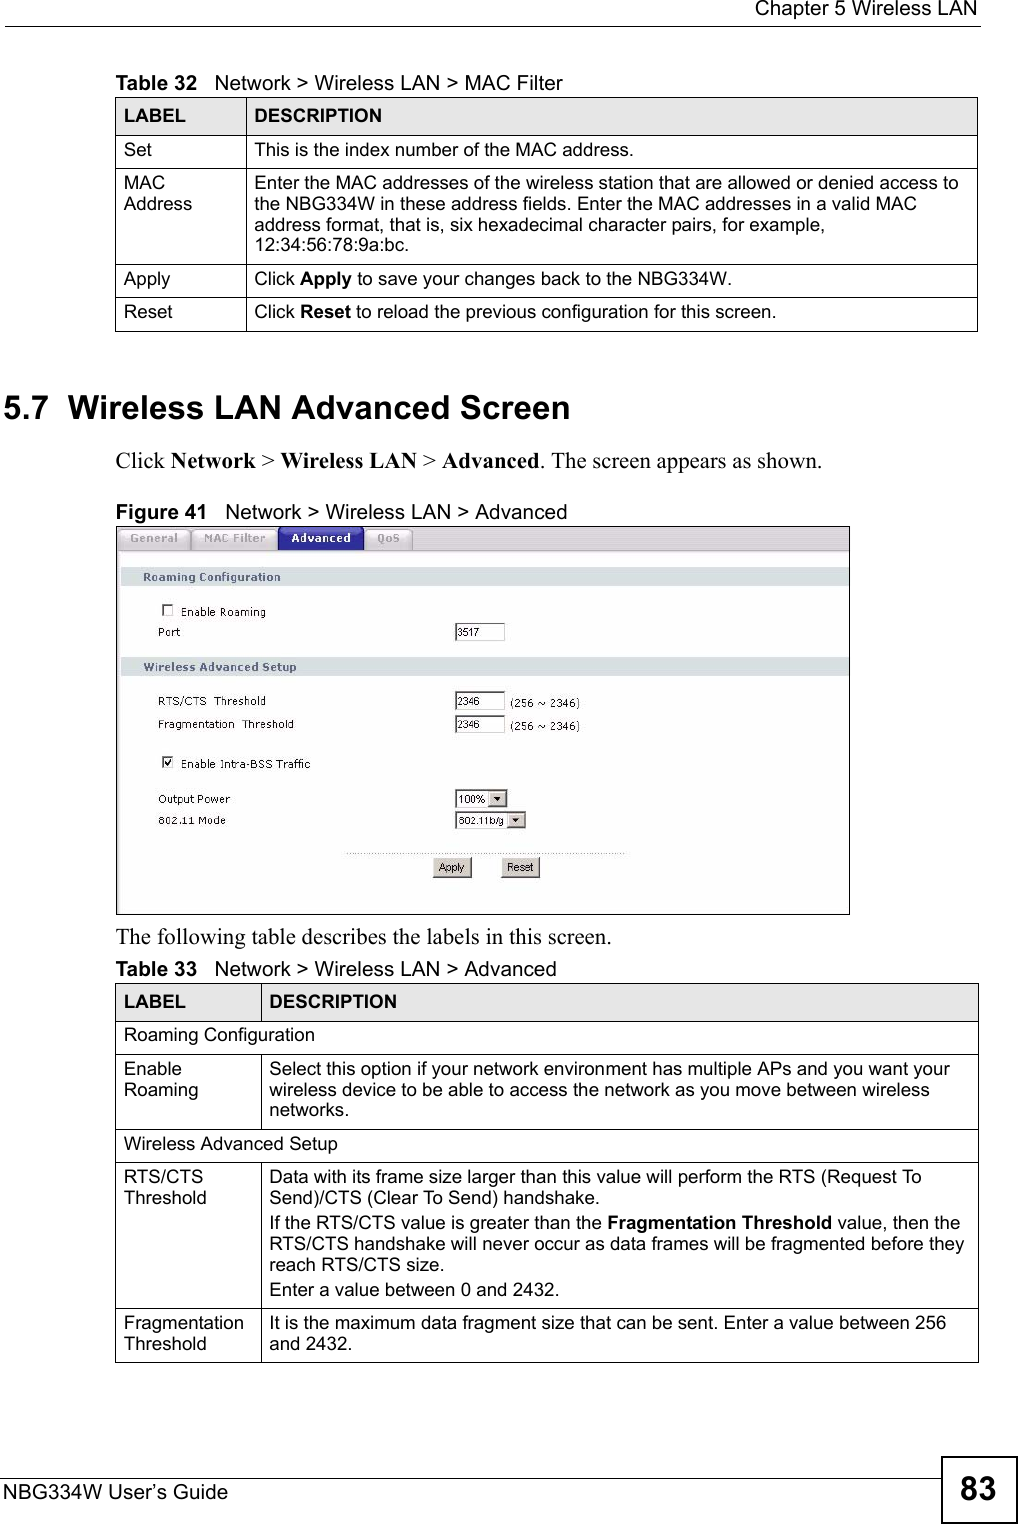  Chapter 5 Wireless LANNBG334W User’s Guide 835.7  Wireless LAN Advanced ScreenClick Network &gt; Wireless LAN &gt; Advanced. The screen appears as shown.Figure 41   Network &gt; Wireless LAN &gt; AdvancedThe following table describes the labels in this screen. Set This is the index number of the MAC address.MAC AddressEnter the MAC addresses of the wireless station that are allowed or denied access to the NBG334W in these address fields. Enter the MAC addresses in a valid MAC address format, that is, six hexadecimal character pairs, for example, 12:34:56:78:9a:bc.Apply Click Apply to save your changes back to the NBG334W.Reset Click Reset to reload the previous configuration for this screen.Table 32   Network &gt; Wireless LAN &gt; MAC FilterLABEL DESCRIPTIONTable 33   Network &gt; Wireless LAN &gt; AdvancedLABEL DESCRIPTIONRoaming ConfigurationEnable RoamingSelect this option if your network environment has multiple APs and you want your wireless device to be able to access the network as you move between wireless networks.Wireless Advanced SetupRTS/CTS ThresholdData with its frame size larger than this value will perform the RTS (Request To Send)/CTS (Clear To Send) handshake. If the RTS/CTS value is greater than the Fragmentation Threshold value, then the RTS/CTS handshake will never occur as data frames will be fragmented before they reach RTS/CTS size.Enter a value between 0 and 2432. Fragmentation ThresholdIt is the maximum data fragment size that can be sent. Enter a value between 256 and 2432. 